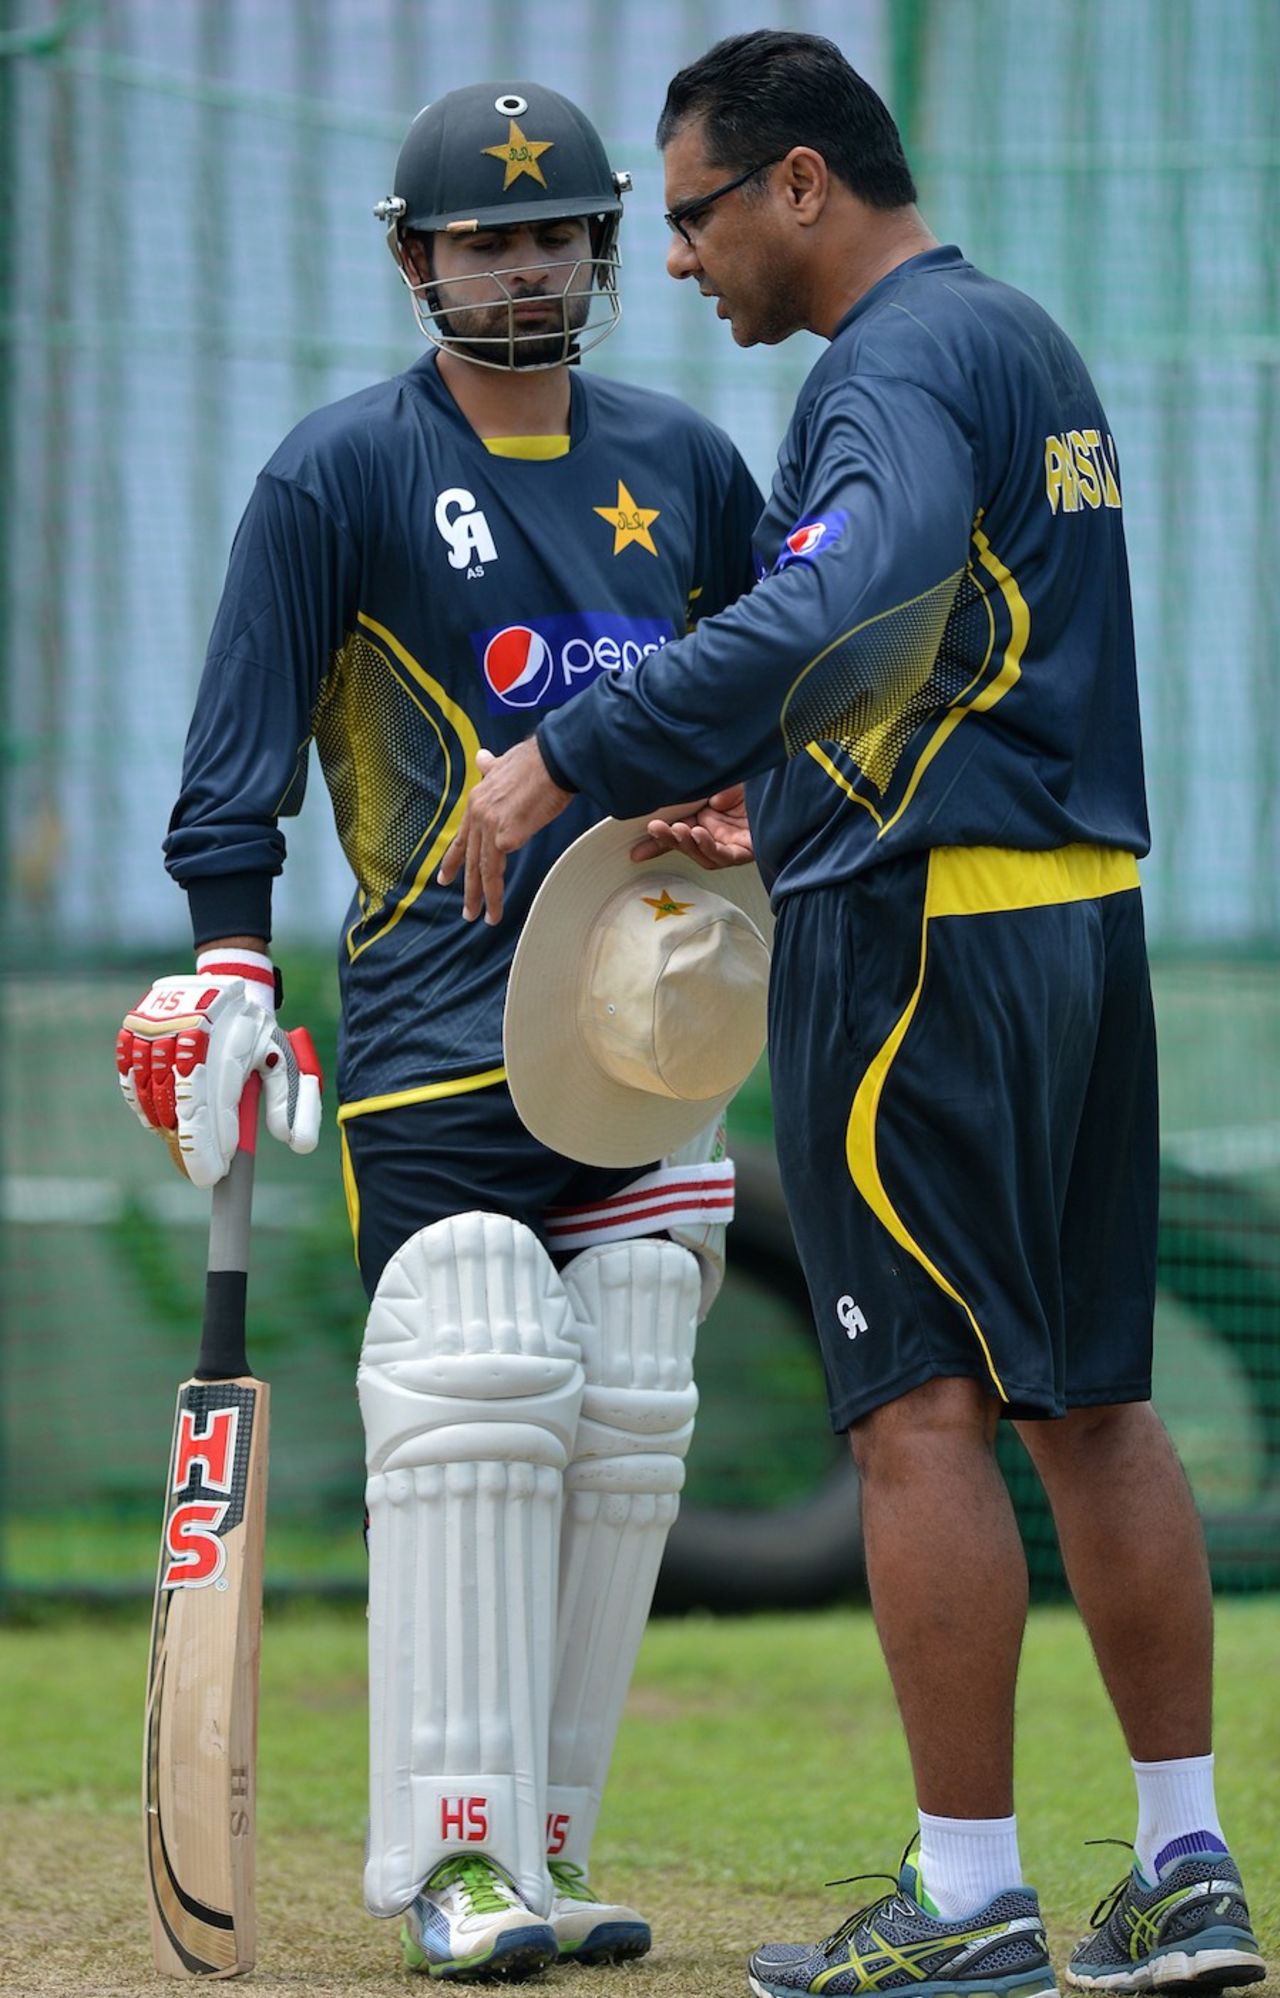 Ahmed Shehzad listens carefully in the presence of Waqar Younis, Galle, August 4, 2014